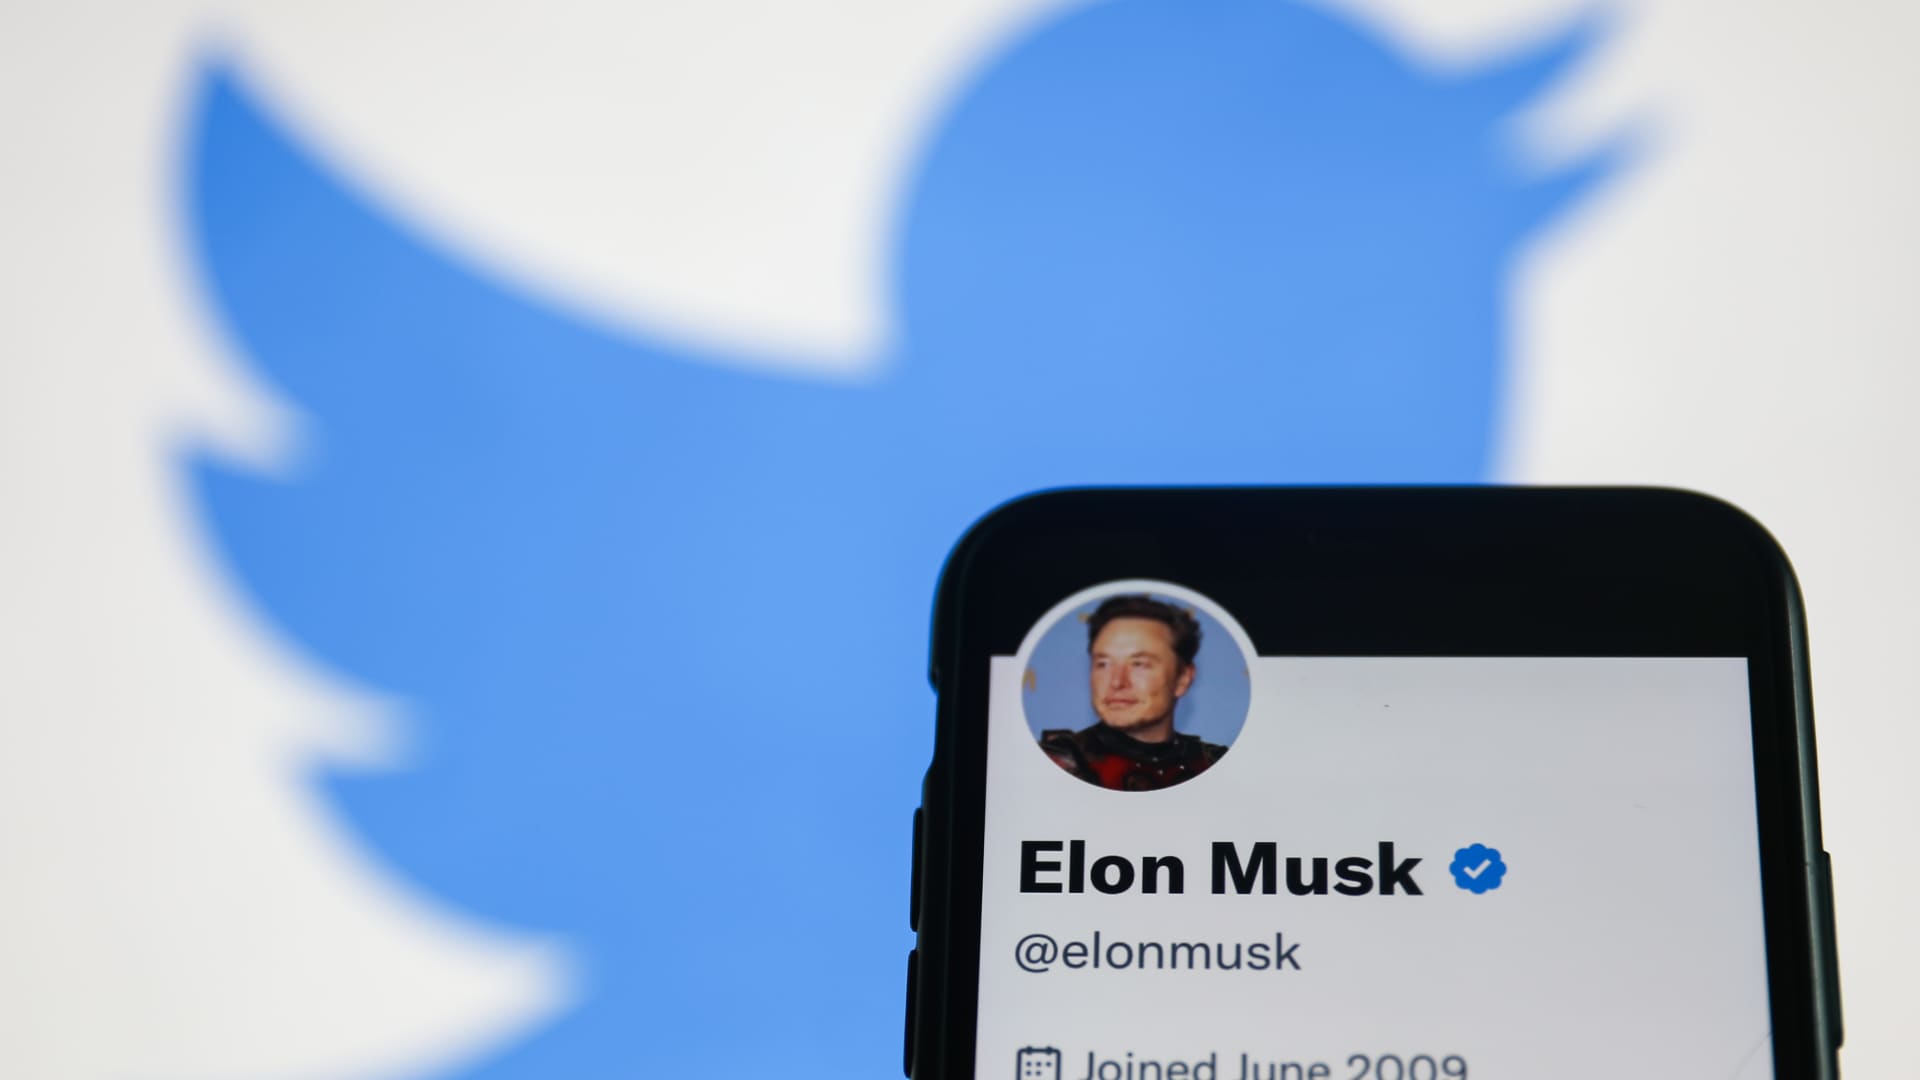 Elon Musk says Twitter ‘trending to breakeven’ after near bankruptcy - CNBC : Elon Musk tweeted Sunday that the last few months have been "extremely tough," but said that Twitter is "now trending to break even."  | Tranquility 國際社群